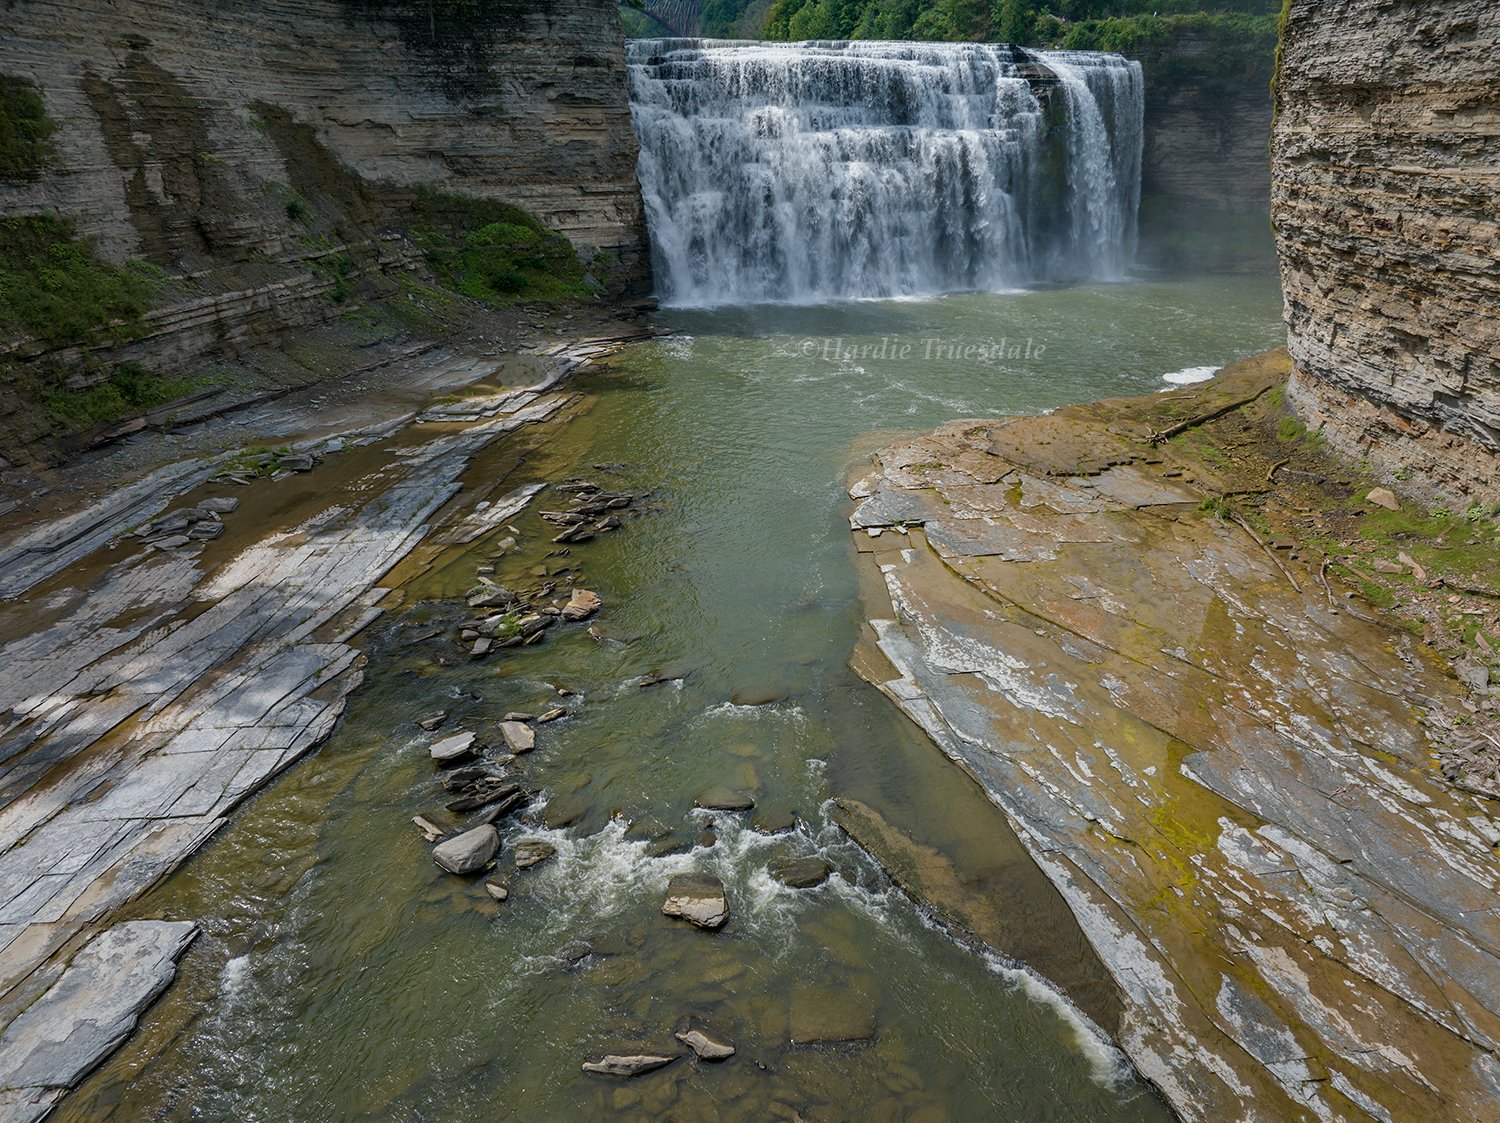 WNY#103 Sedimentary Layers & Middle Falls, Letchworth State Park